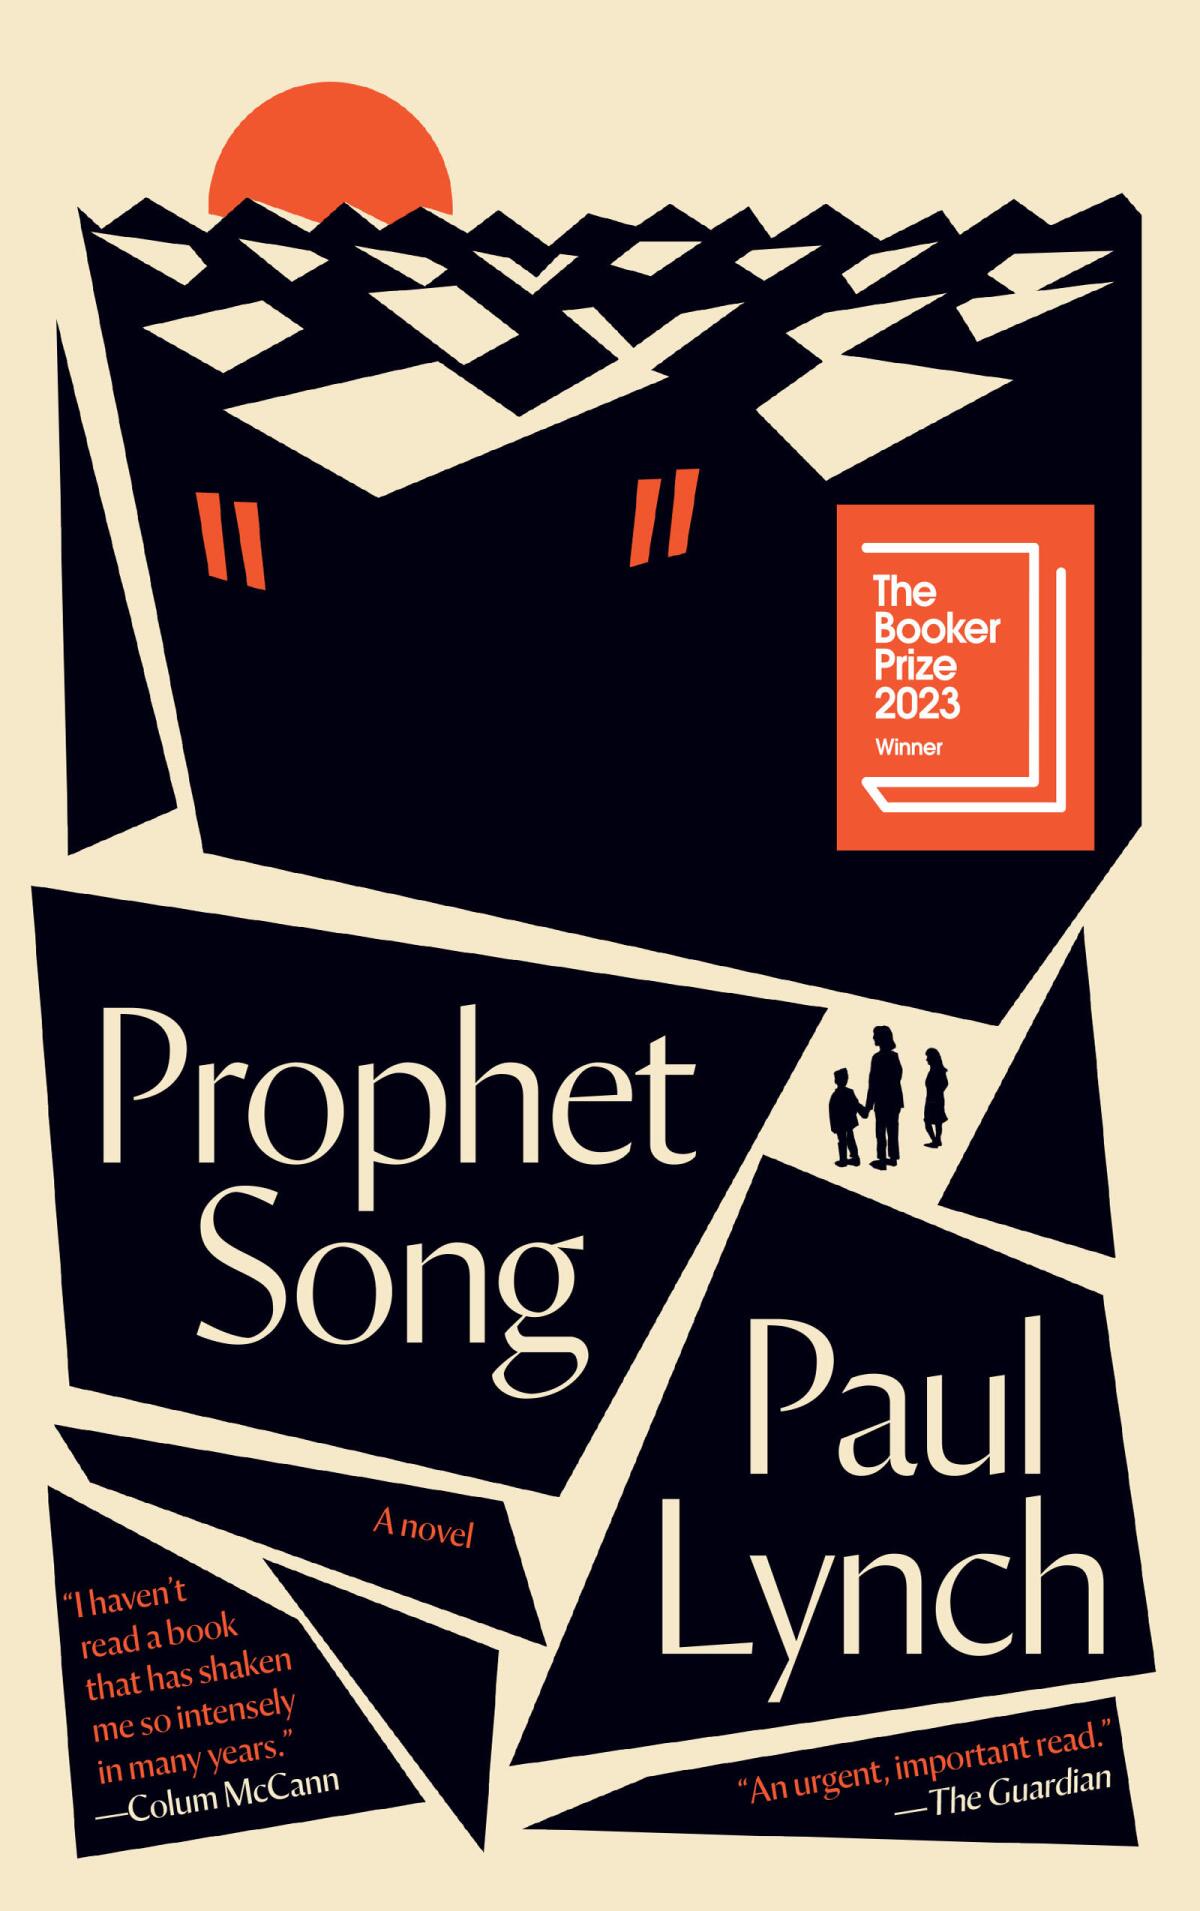 Book cover for "Prophet Song" by Paul Lynch